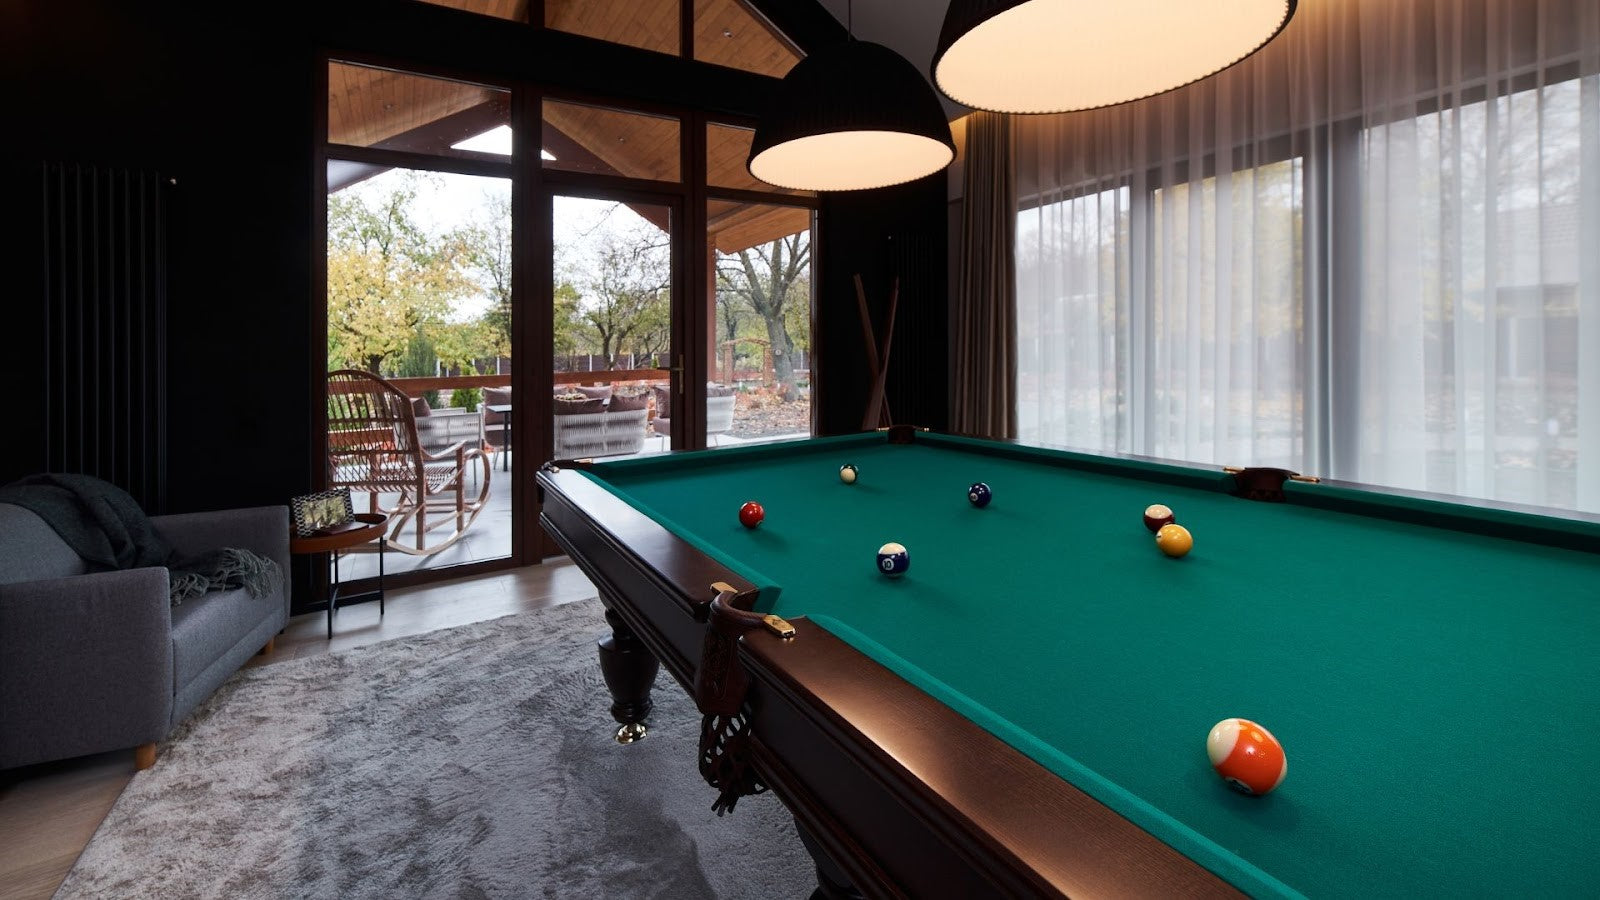 Comparison of snooker tables to other billiard tables